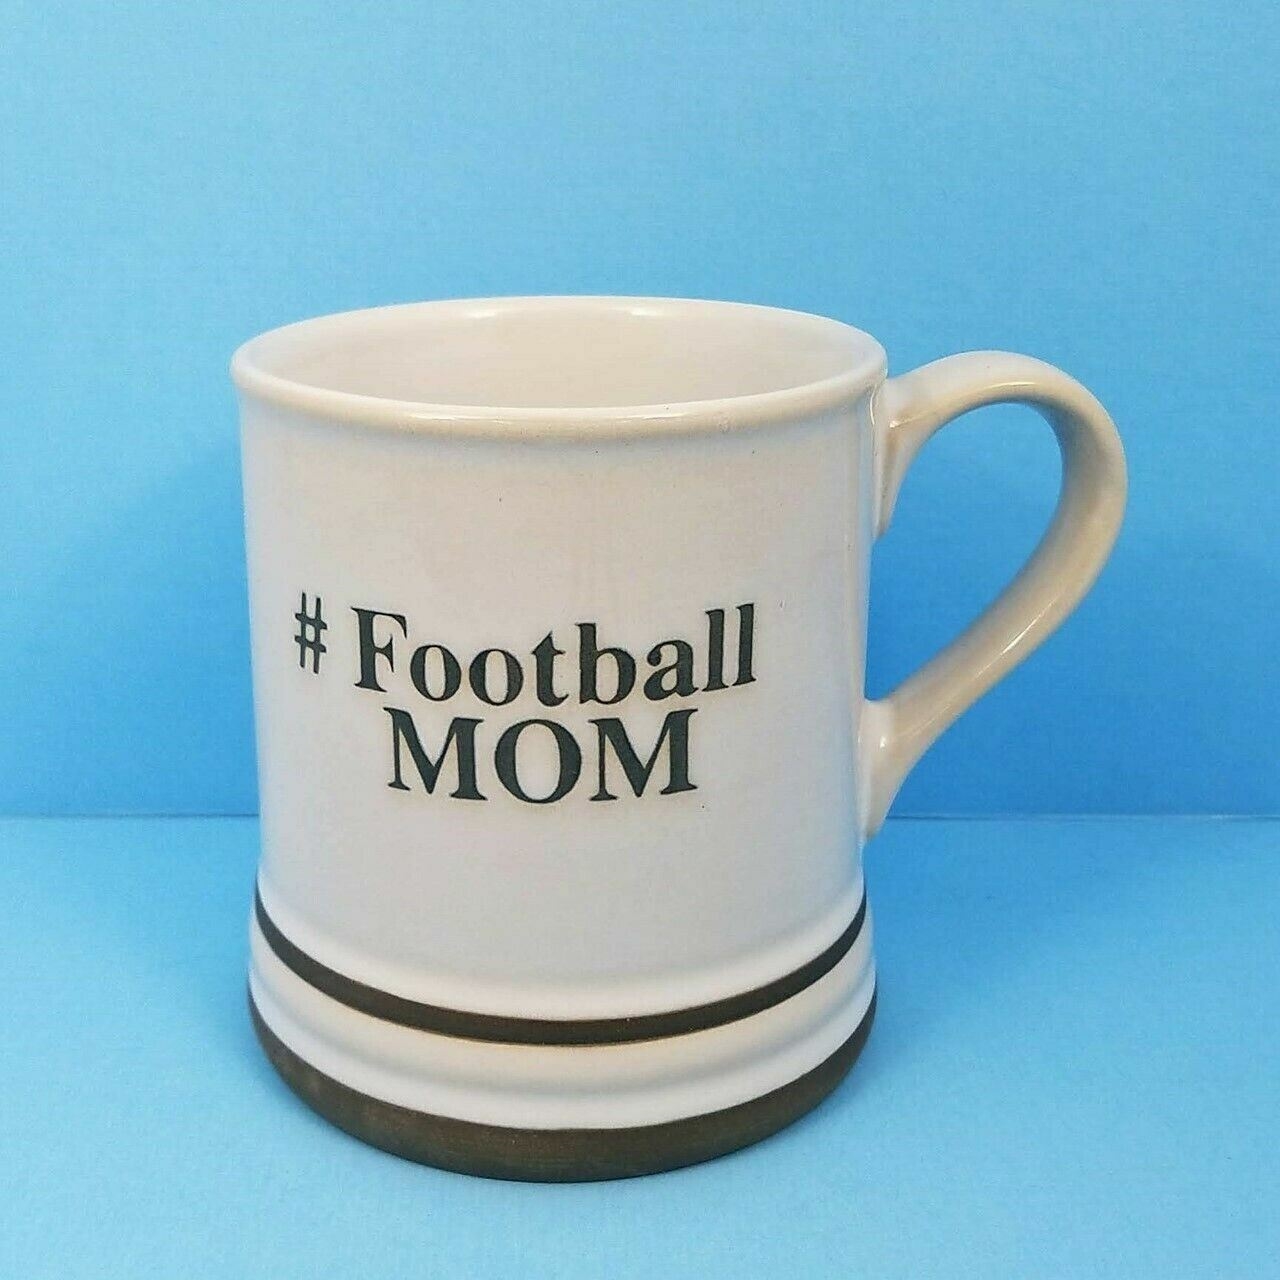 This Football Mom Coffee Mug Cup Pen Pencil Holder by Blue Sky Spectrum 17oz Hashtag is made with love by Premier Homegoods! Shop more unique gift ideas today with Spots Initiatives, the best way to support creators.